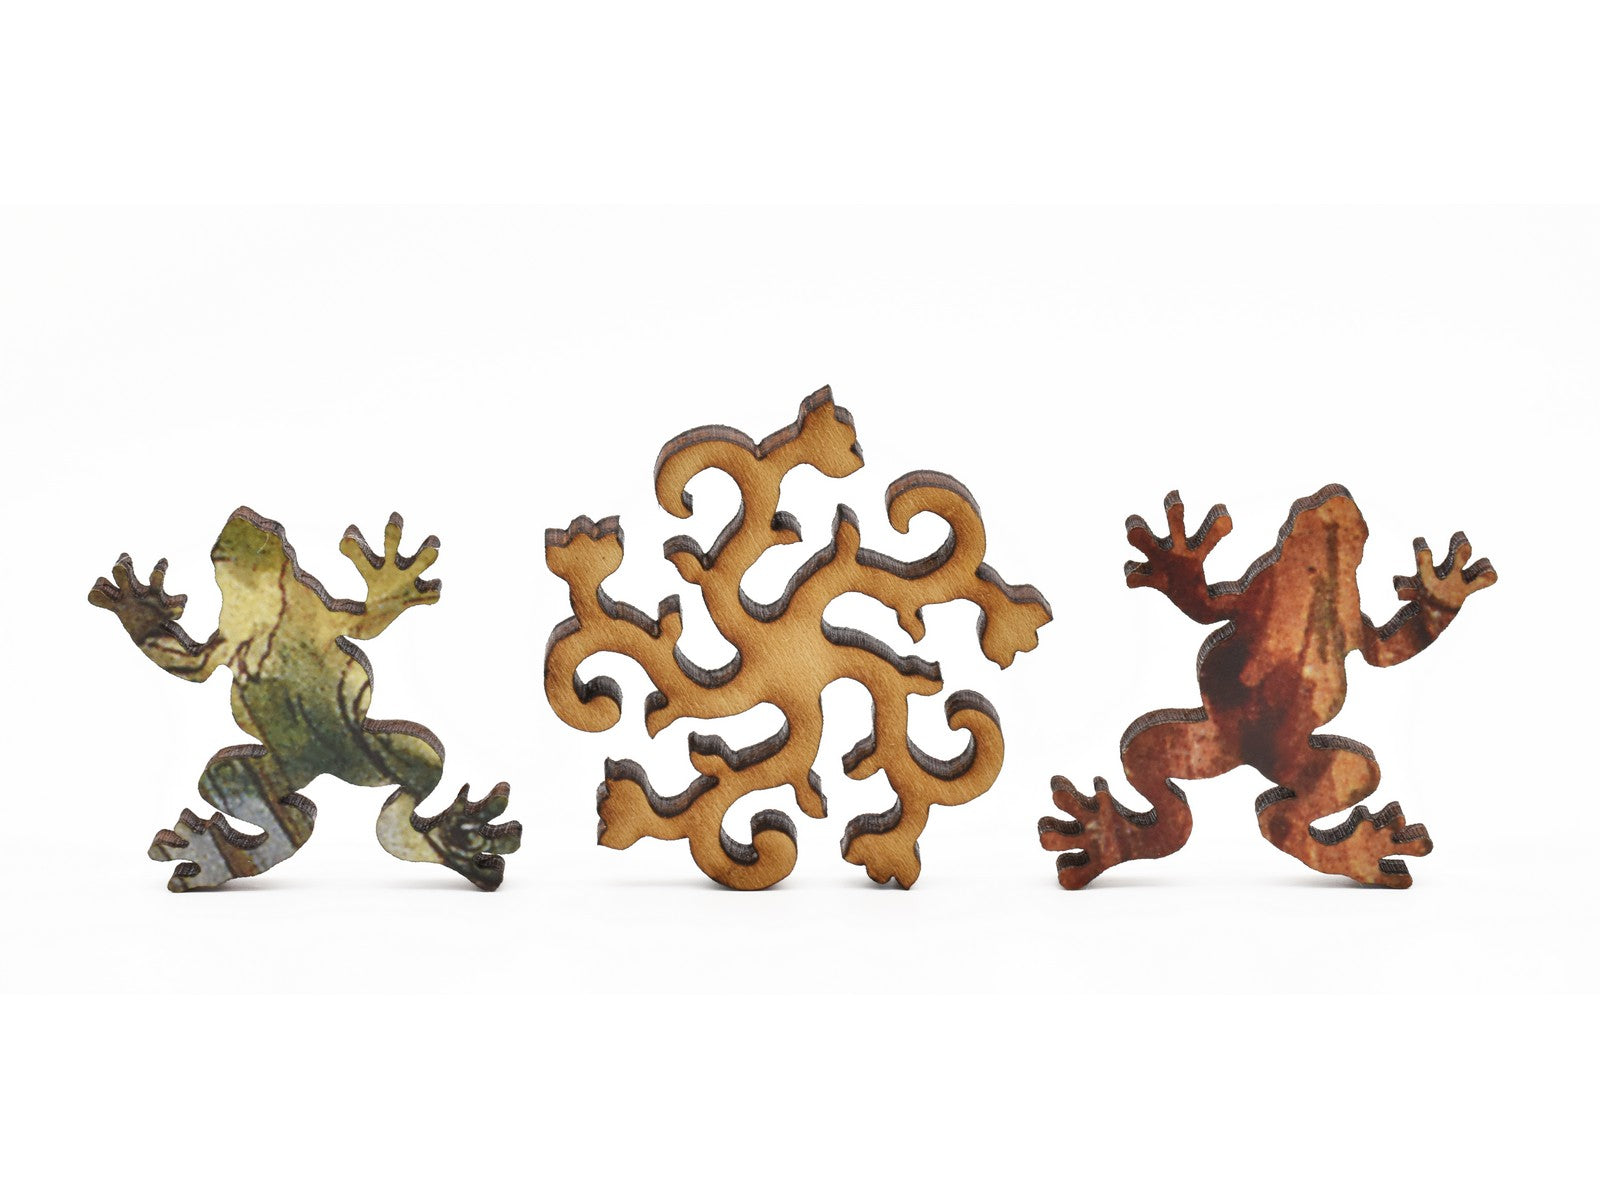 A closeup of pieces in the shape of flowering vines and frogs.